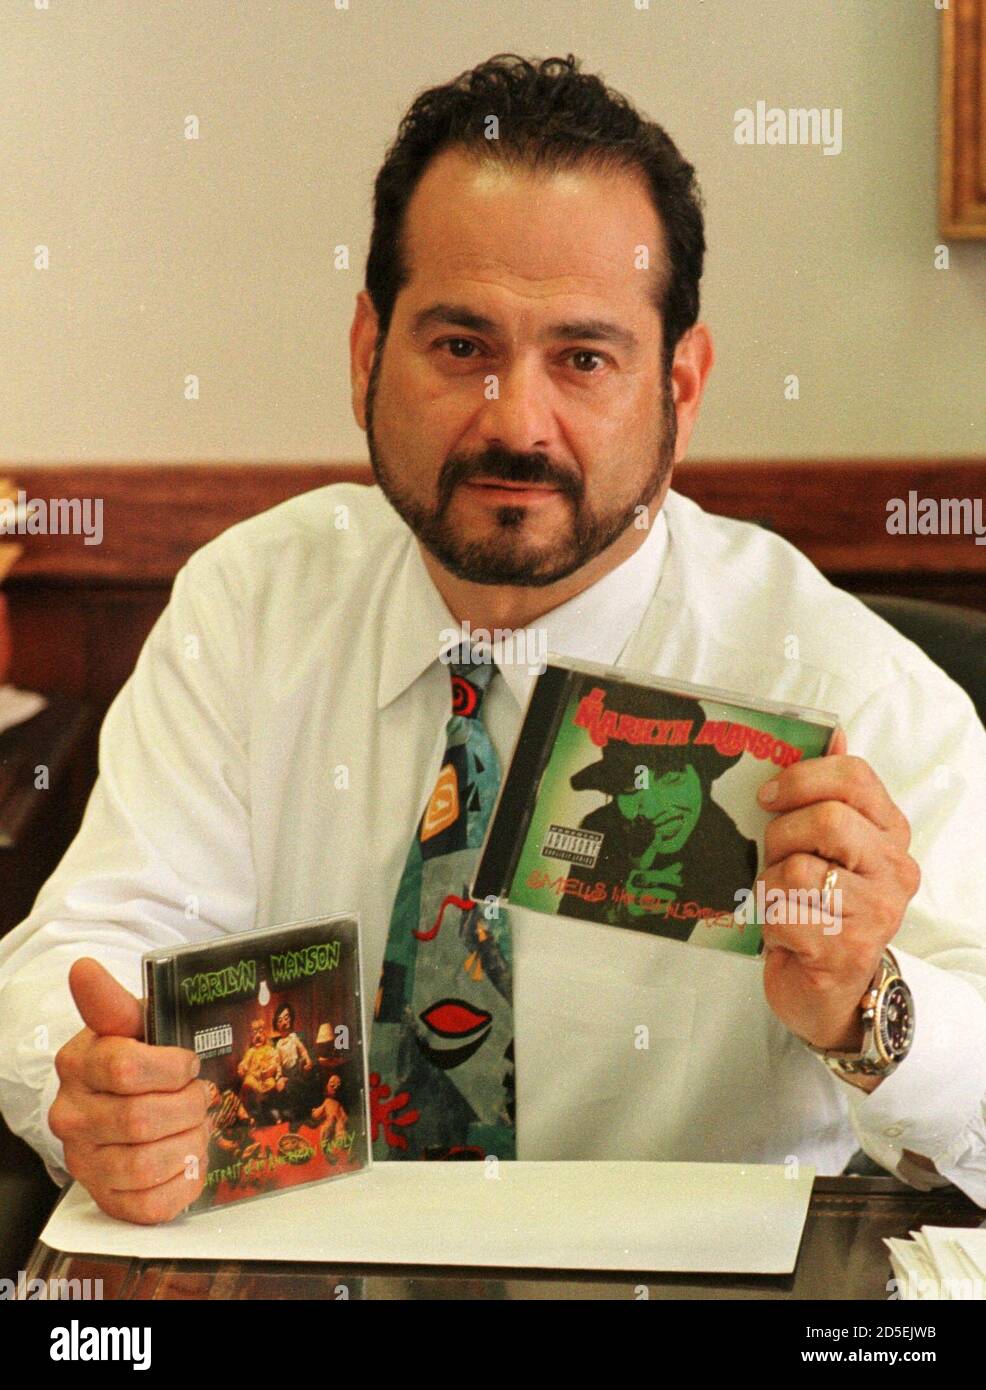 Attorney Paul J. Cambria Jr., spokesman and counsel for shock-rock musician 'Marilyn Manson' holds two recent CD's April 21 in Buffalo, NY, as he disclaims any connection between the singer and the high school shootings in Littleton, CO. The shooting suspects reportedly talked about the music of 'Marilyn Manson', a stage name for singer Brian Warner derived from Marilyn Monroe and Charles Manson.  JT/RC Stock Photo